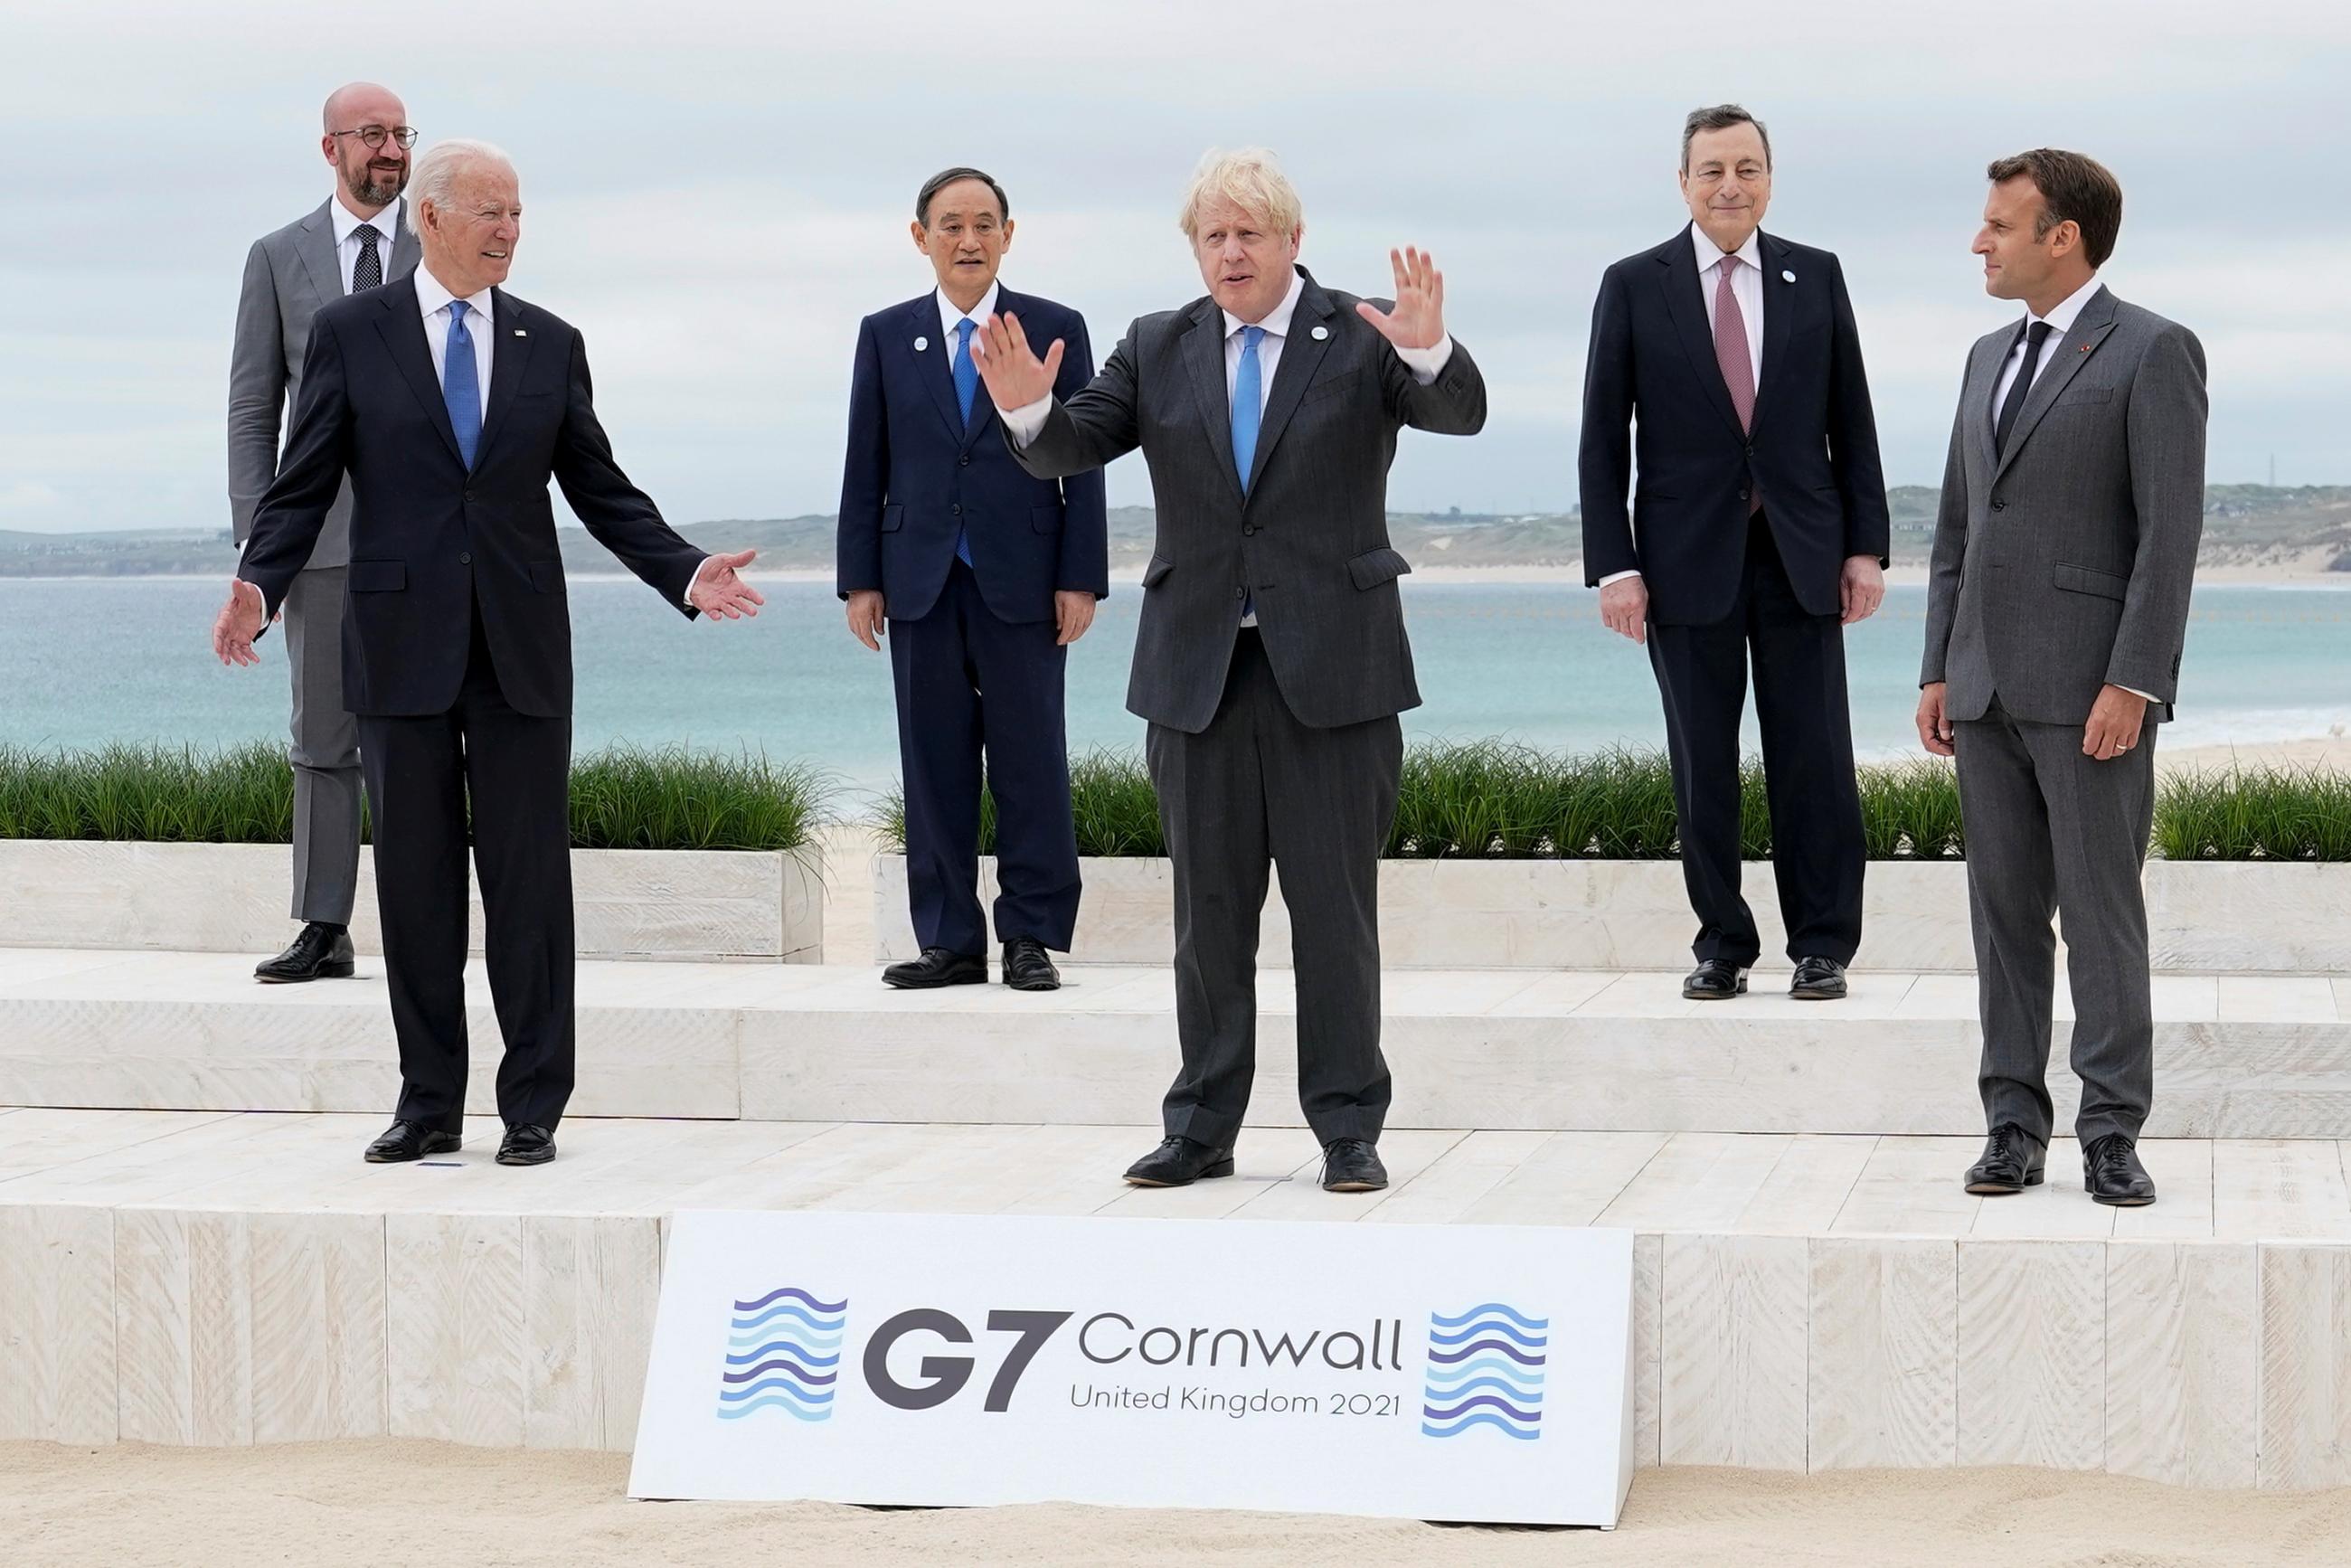 G7 leaders pose for a group photo in Carbis Bay, Cornwall, Britain on June 11, 2021. Patrick Semansky/Pool via REUTERS